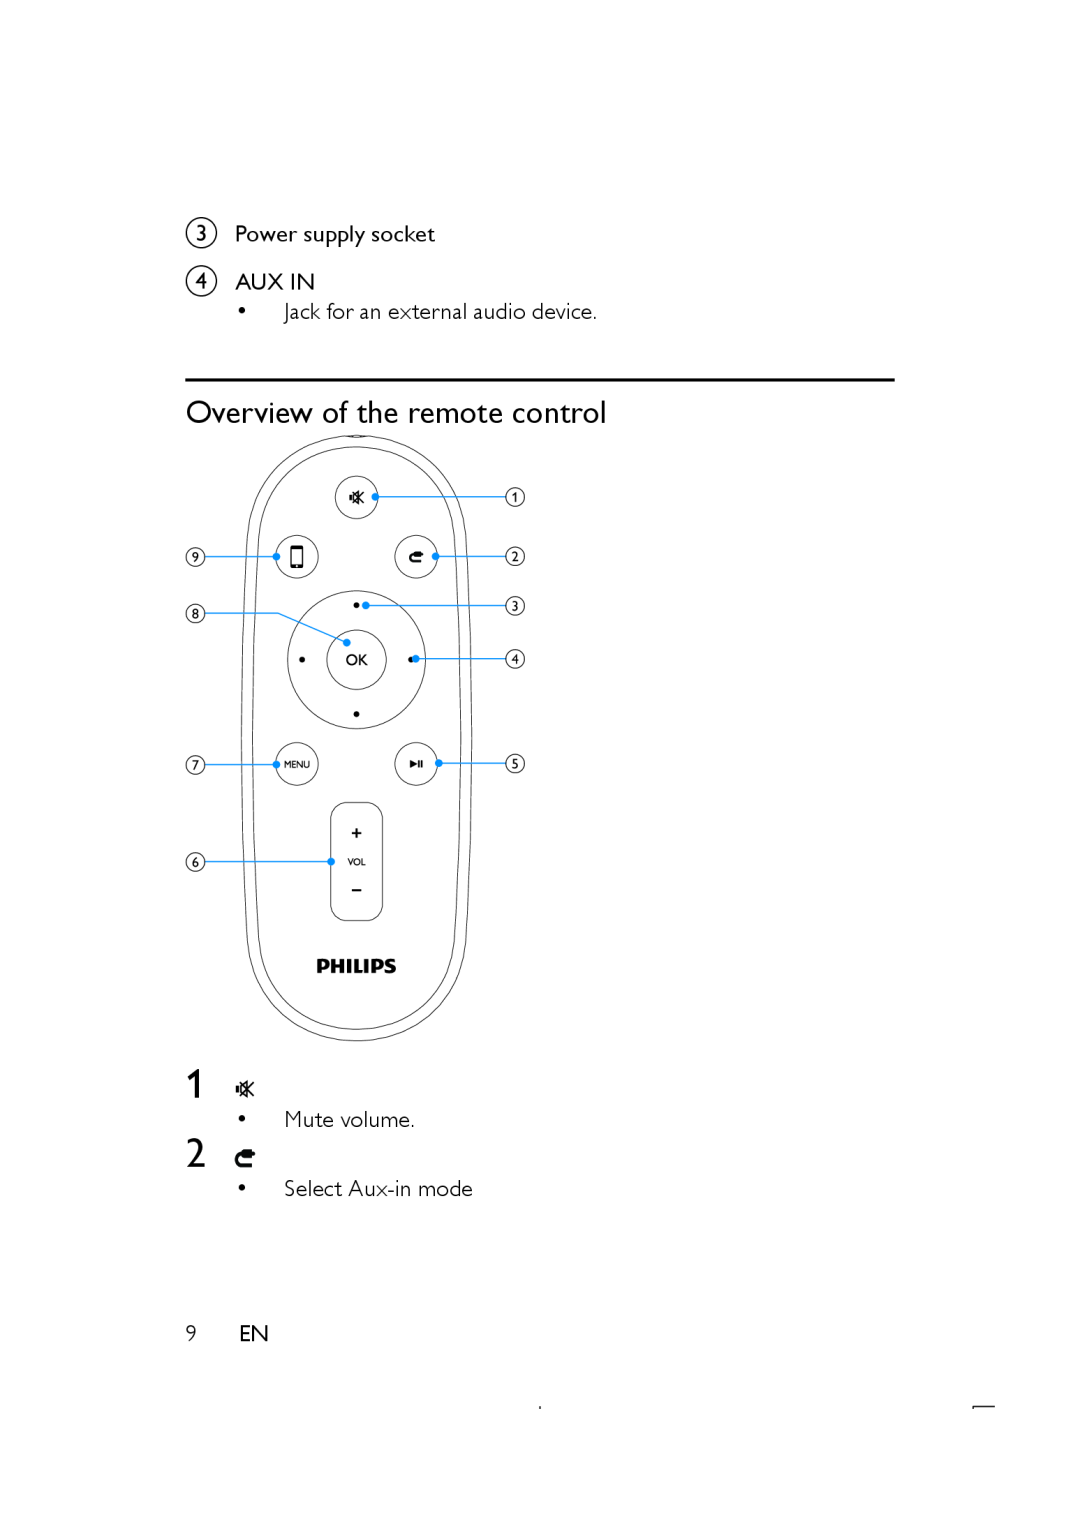 Philips DS8500 Overview of the remote control, C Power supply socket D AUX IN Jack for an external audio device, hc d 